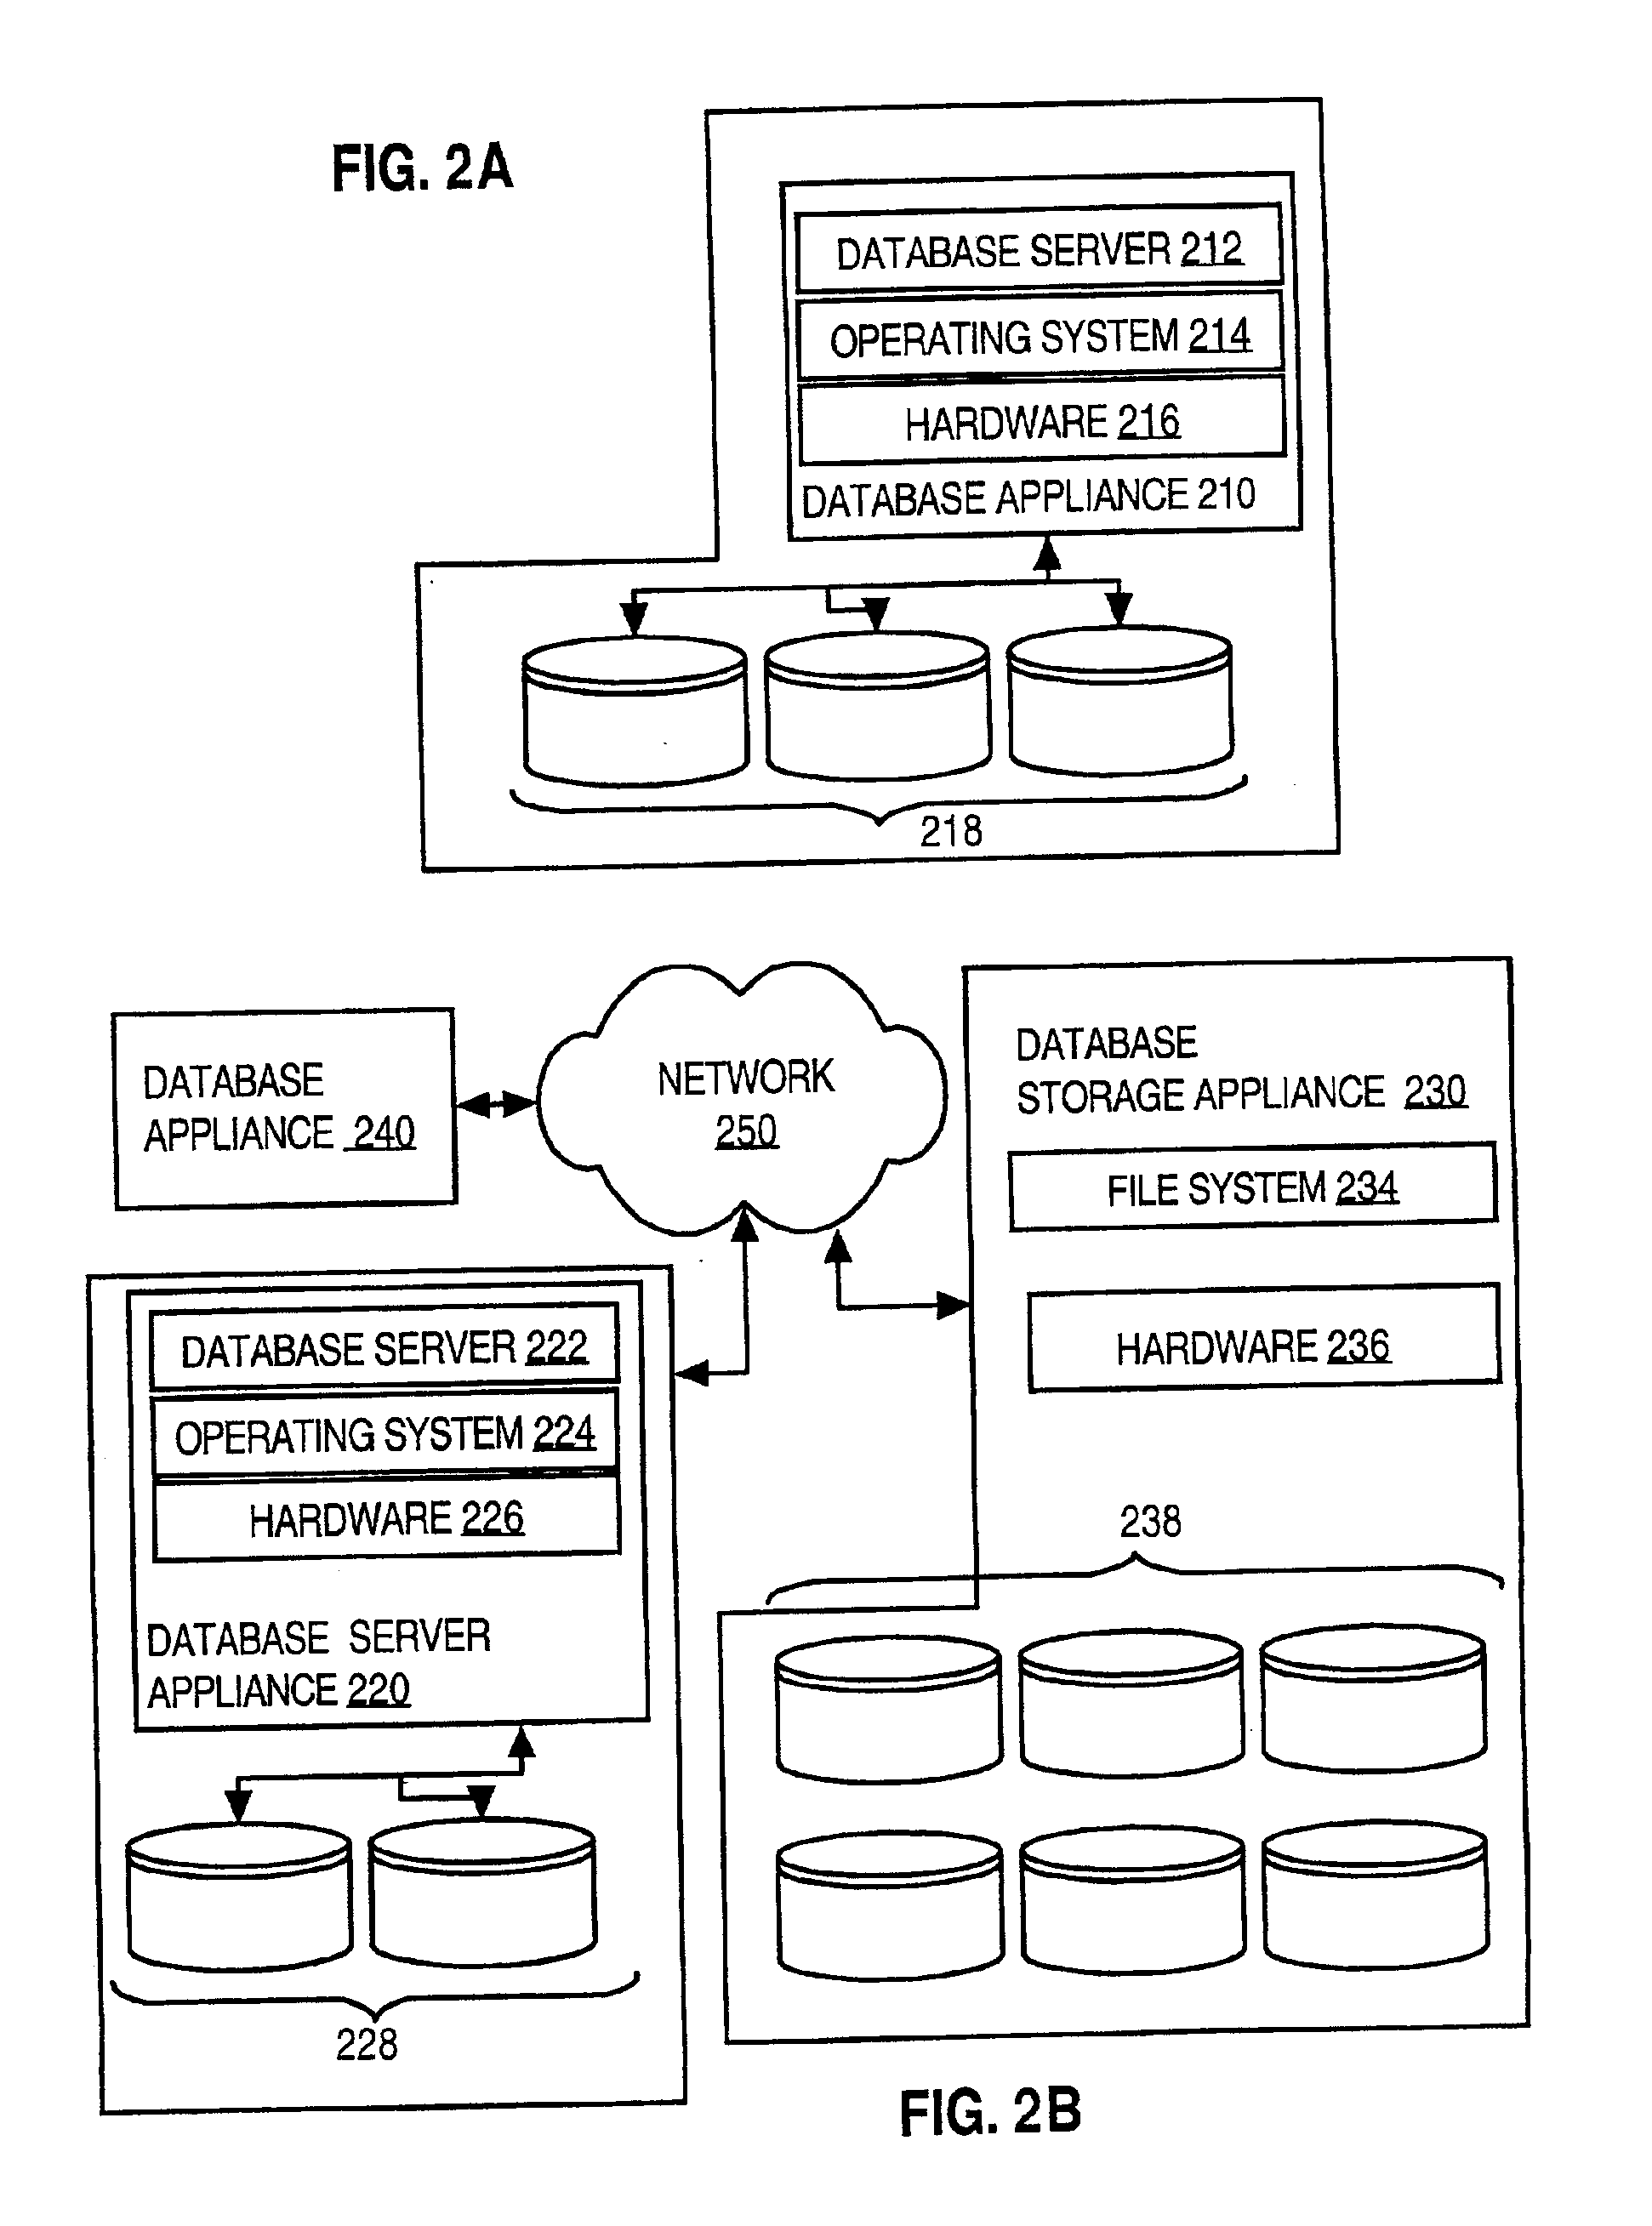 Techniques for managing database systems with a community server